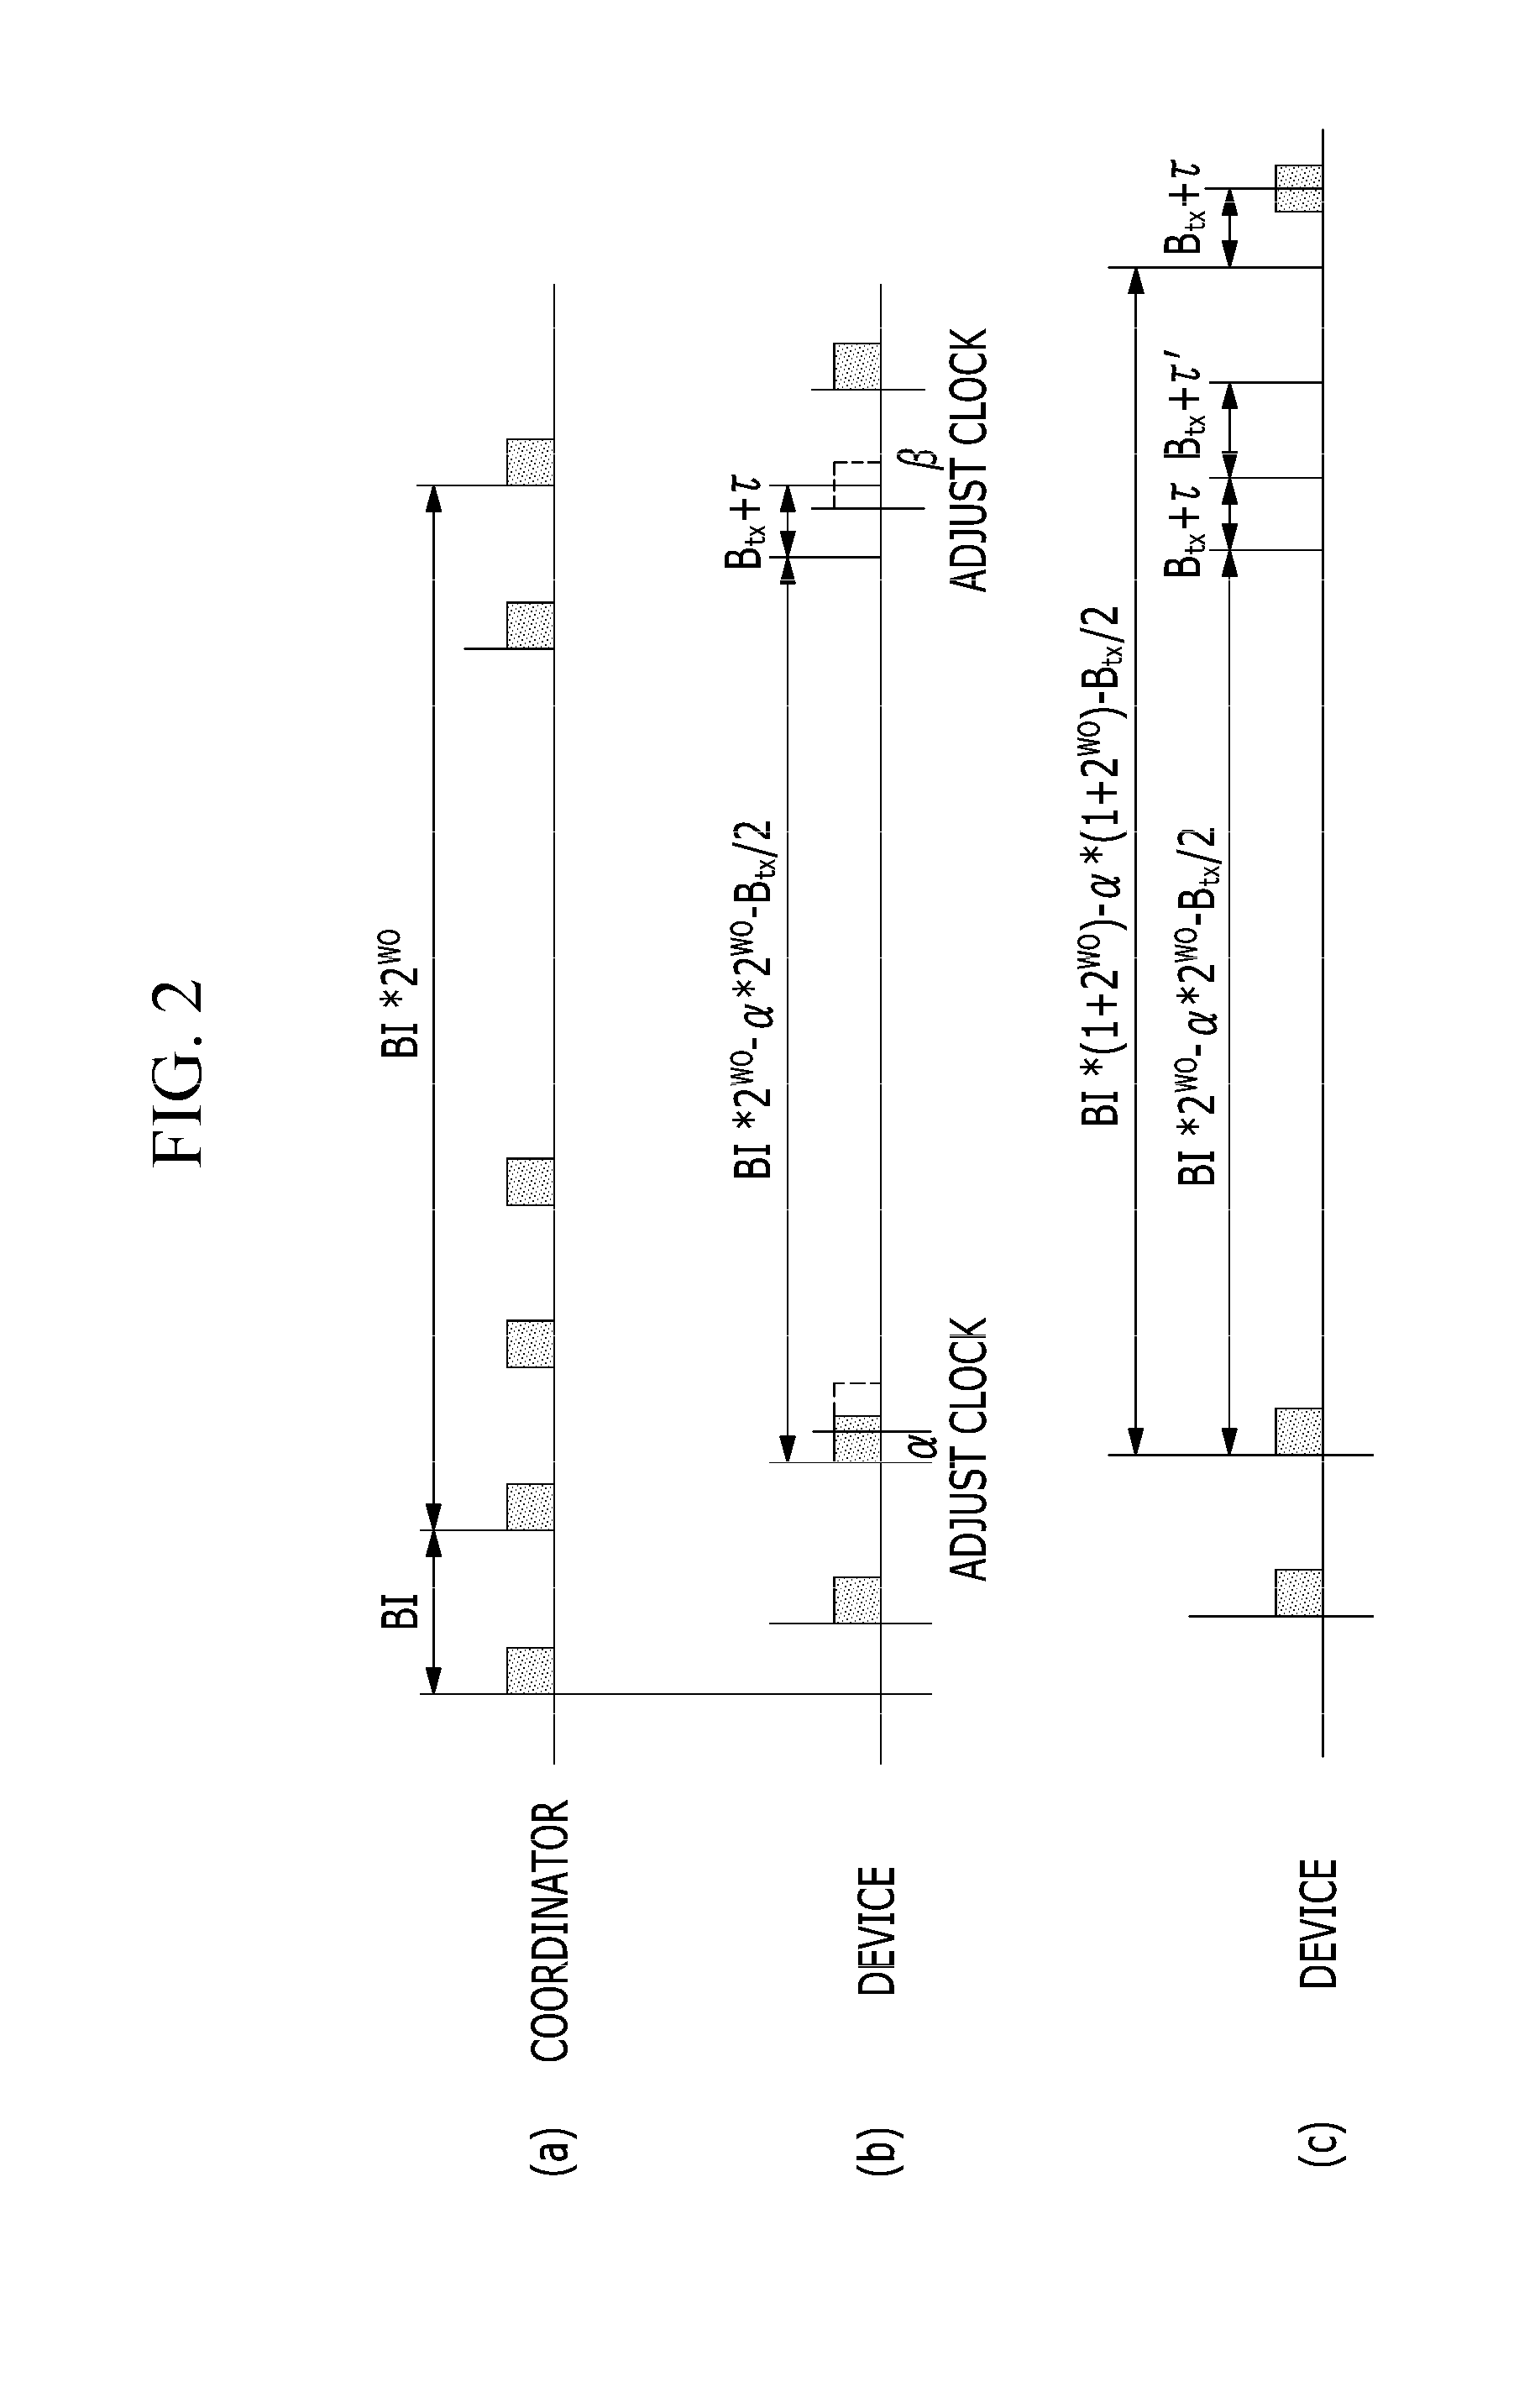 Method of synchronization and link access for low energy critical infrastructure monitoring network